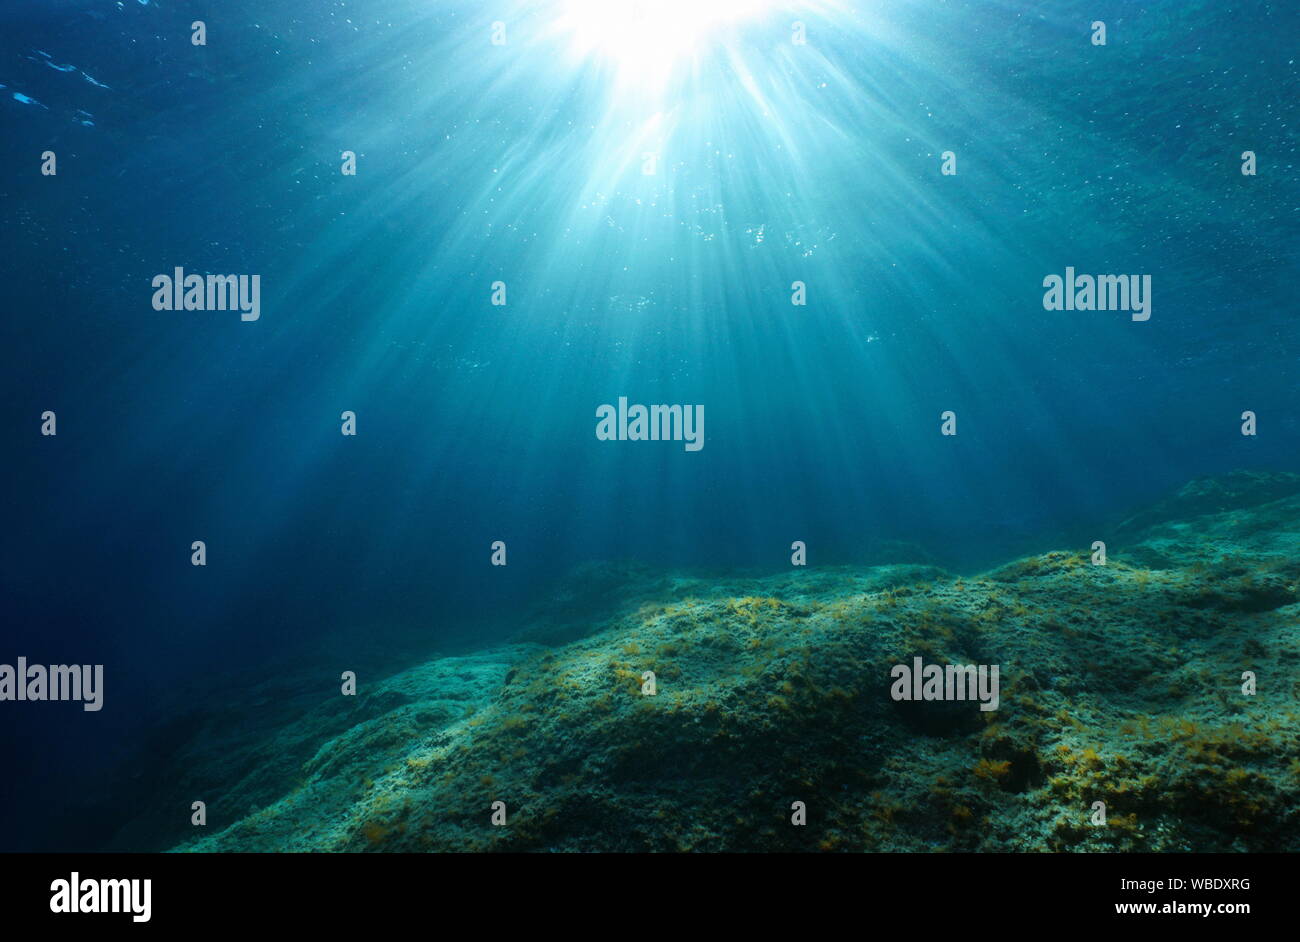 Natural sunlight and rocky seabed underwater in the Mediterranean sea, Cote d'Azur, France Stock Photo